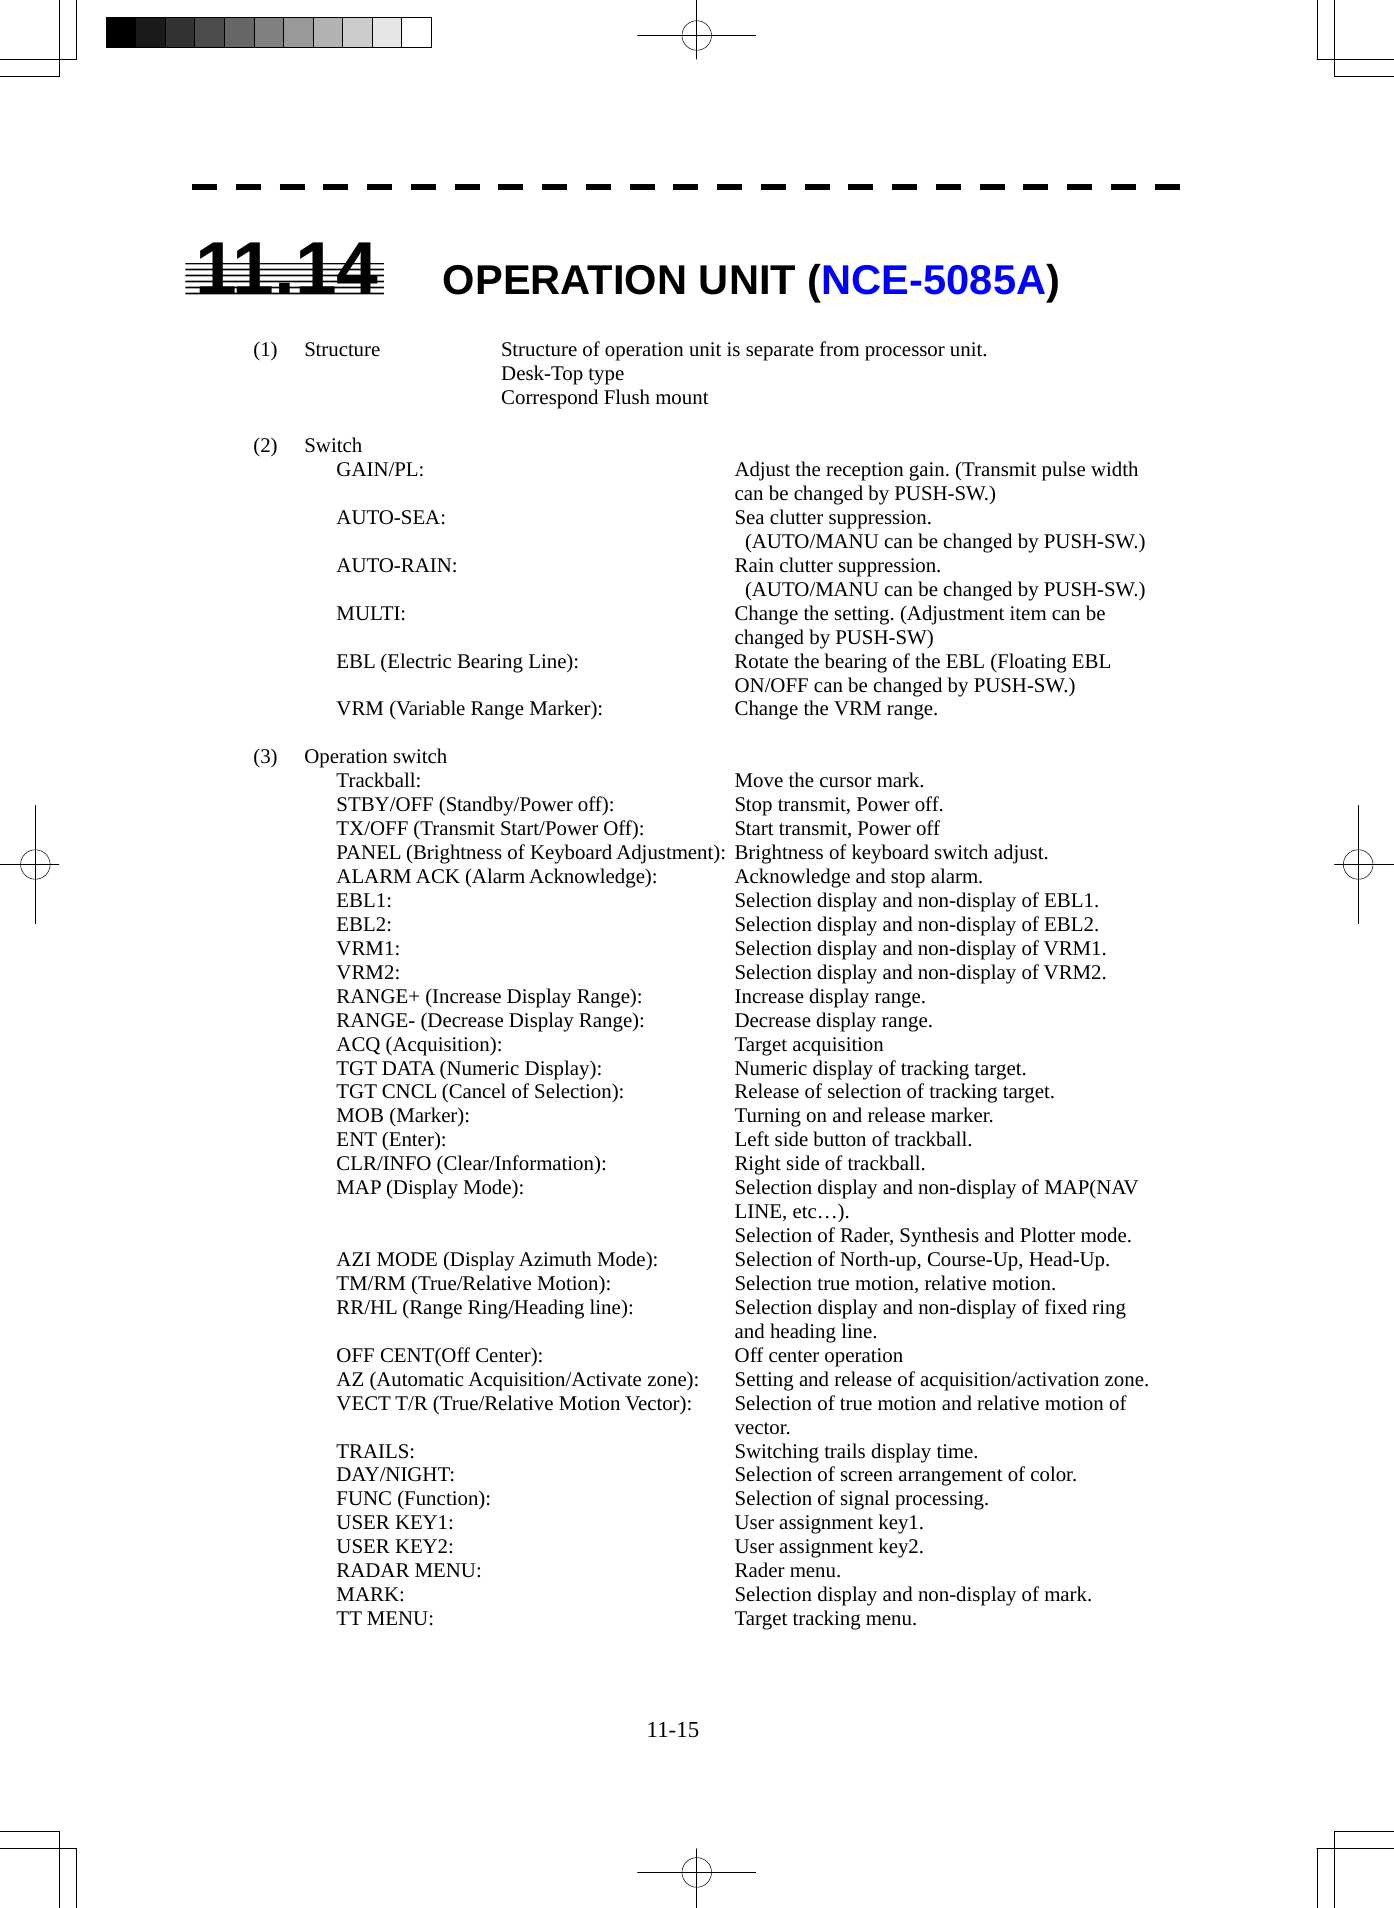  11-15 11.14 OPERATION UNIT (NCE-5085A)  (1)  Structure  Structure of operation unit is separate from processor unit.    Desk-Top type     Correspond Flush mount  (2) Switch GAIN/PL:  Adjust the reception gain. (Transmit pulse width can be changed by PUSH-SW.) AUTO-SEA:  Sea clutter suppression.   (AUTO/MANU can be changed by PUSH-SW.) AUTO-RAIN:  Rain clutter suppression.   (AUTO/MANU can be changed by PUSH-SW.) MULTI:  Change the setting. (Adjustment item can be changed by PUSH-SW) EBL (Electric Bearing Line):  Rotate the bearing of the EBL (Floating EBL ON/OFF can be changed by PUSH-SW.) VRM (Variable Range Marker):  Change the VRM range.  (3) Operation switch Trackball:  Move the cursor mark. STBY/OFF (Standby/Power off):  Stop transmit, Power off. TX/OFF (Transmit Start/Power Off):  Start transmit, Power off PANEL (Brightness of Keyboard Adjustment): Brightness of keyboard switch adjust. ALARM ACK (Alarm Acknowledge):  Acknowledge and stop alarm. EBL1:  Selection display and non-display of EBL1. EBL2:  Selection display and non-display of EBL2. VRM1:  Selection display and non-display of VRM1. VRM2:  Selection display and non-display of VRM2. RANGE+ (Increase Display Range): Increase display range. RANGE- (Decrease Display Range):  Decrease display range. ACQ (Acquisition):  Target acquisition TGT DATA (Numeric Display):  Numeric display of tracking target. TGT CNCL (Cancel of Selection):  Release of selection of tracking target. MOB (Marker):  Turning on and release marker. ENT (Enter):  Left side button of trackball. CLR/INFO (Clear/Information):  Right side of trackball. MAP (Display Mode):  Selection display and non-display of MAP(NAV LINE, etc…).   Selection of Rader, Synthesis and Plotter mode. AZI MODE (Display Azimuth Mode):  Selection of North-up, Course-Up, Head-Up. TM/RM (True/Relative Motion):  Selection true motion, relative motion. RR/HL (Range Ring/Heading line):  Selection display and non-display of fixed ring and heading line. OFF CENT(Off Center):  Off center operation AZ (Automatic Acquisition/Activate zone):  Setting and release of acquisition/activation zone. VECT T/R (True/Relative Motion Vector):  Selection of true motion and relative motion of vector. TRAILS:  Switching trails display time. DAY/NIGHT: Selection of screen arrangement of color. FUNC (Function):  Selection of signal processing. USER KEY1:  User assignment key1. USER KEY2:  User assignment key2. RADAR MENU:  Rader menu. MARK:  Selection display and non-display of mark. TT MENU:  Target tracking menu.  